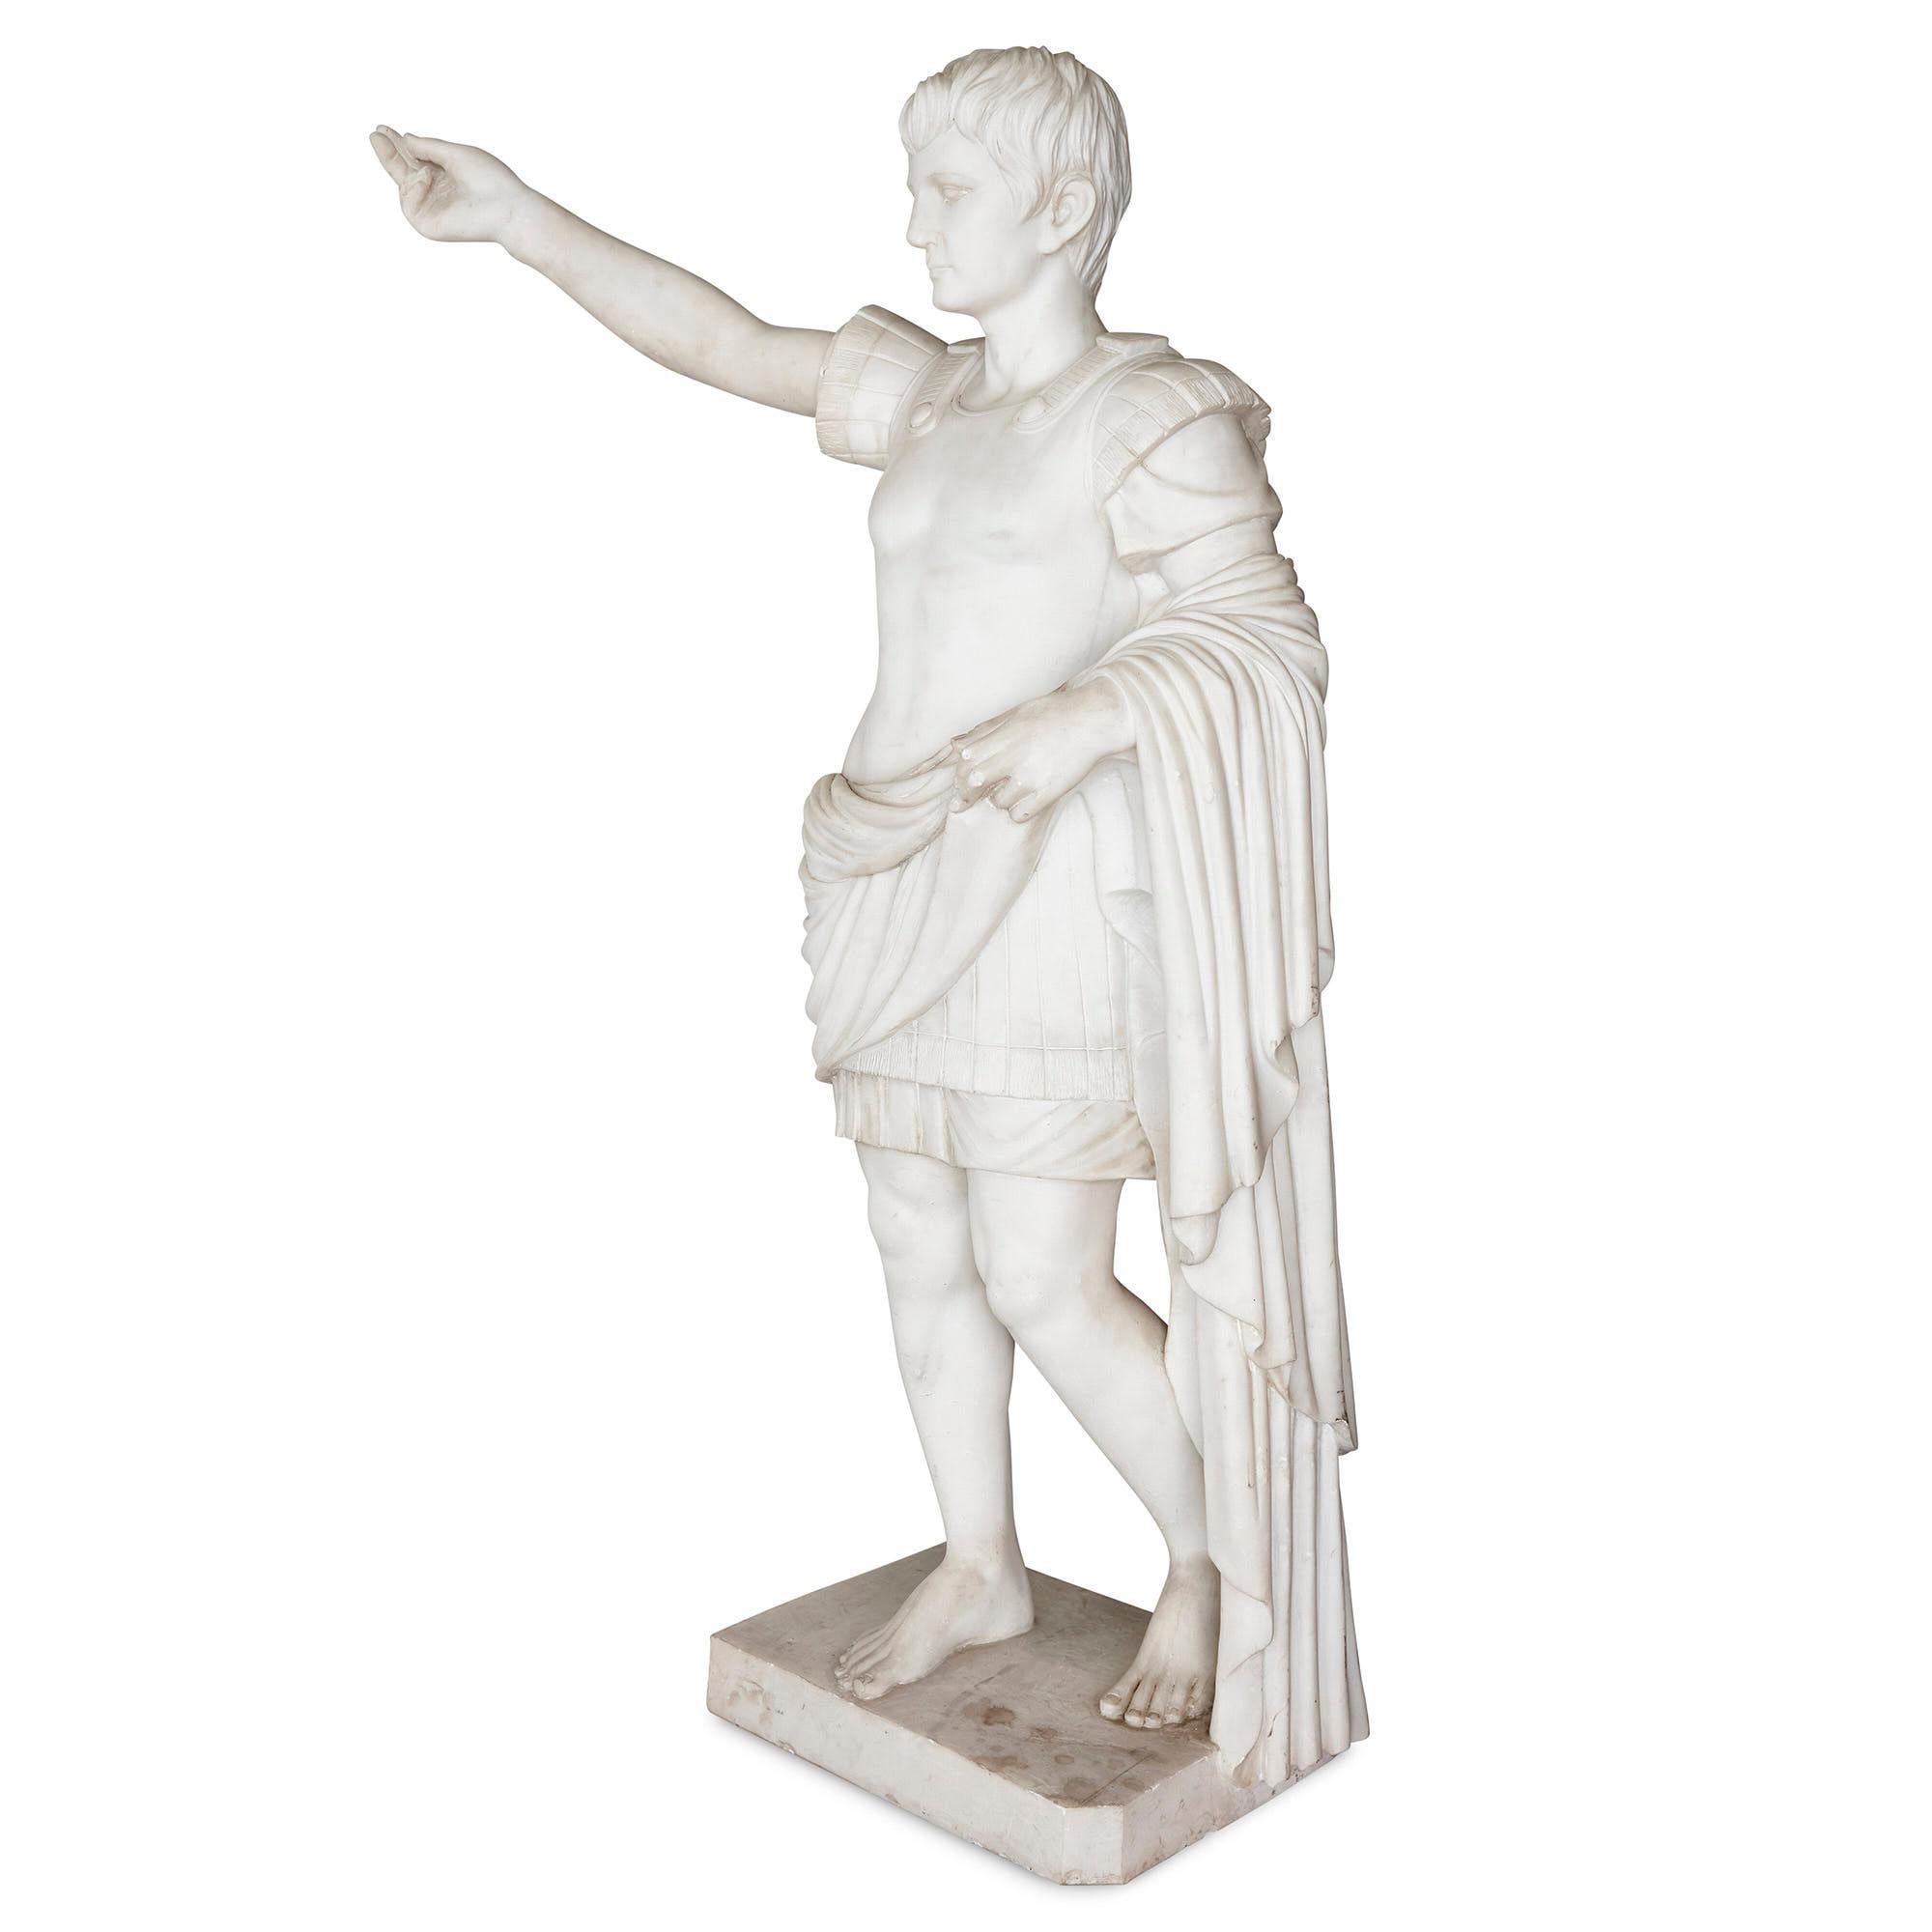 Large antique sculpted marble figure of Caesar Augustus
Italian, early 20th century
Measures: Height 186cm, width 118cm, depth 44cm

Known as the ‘Augustus of Prima Porta,’ the original bronze version of this sculpture was created circa 20 BCE.